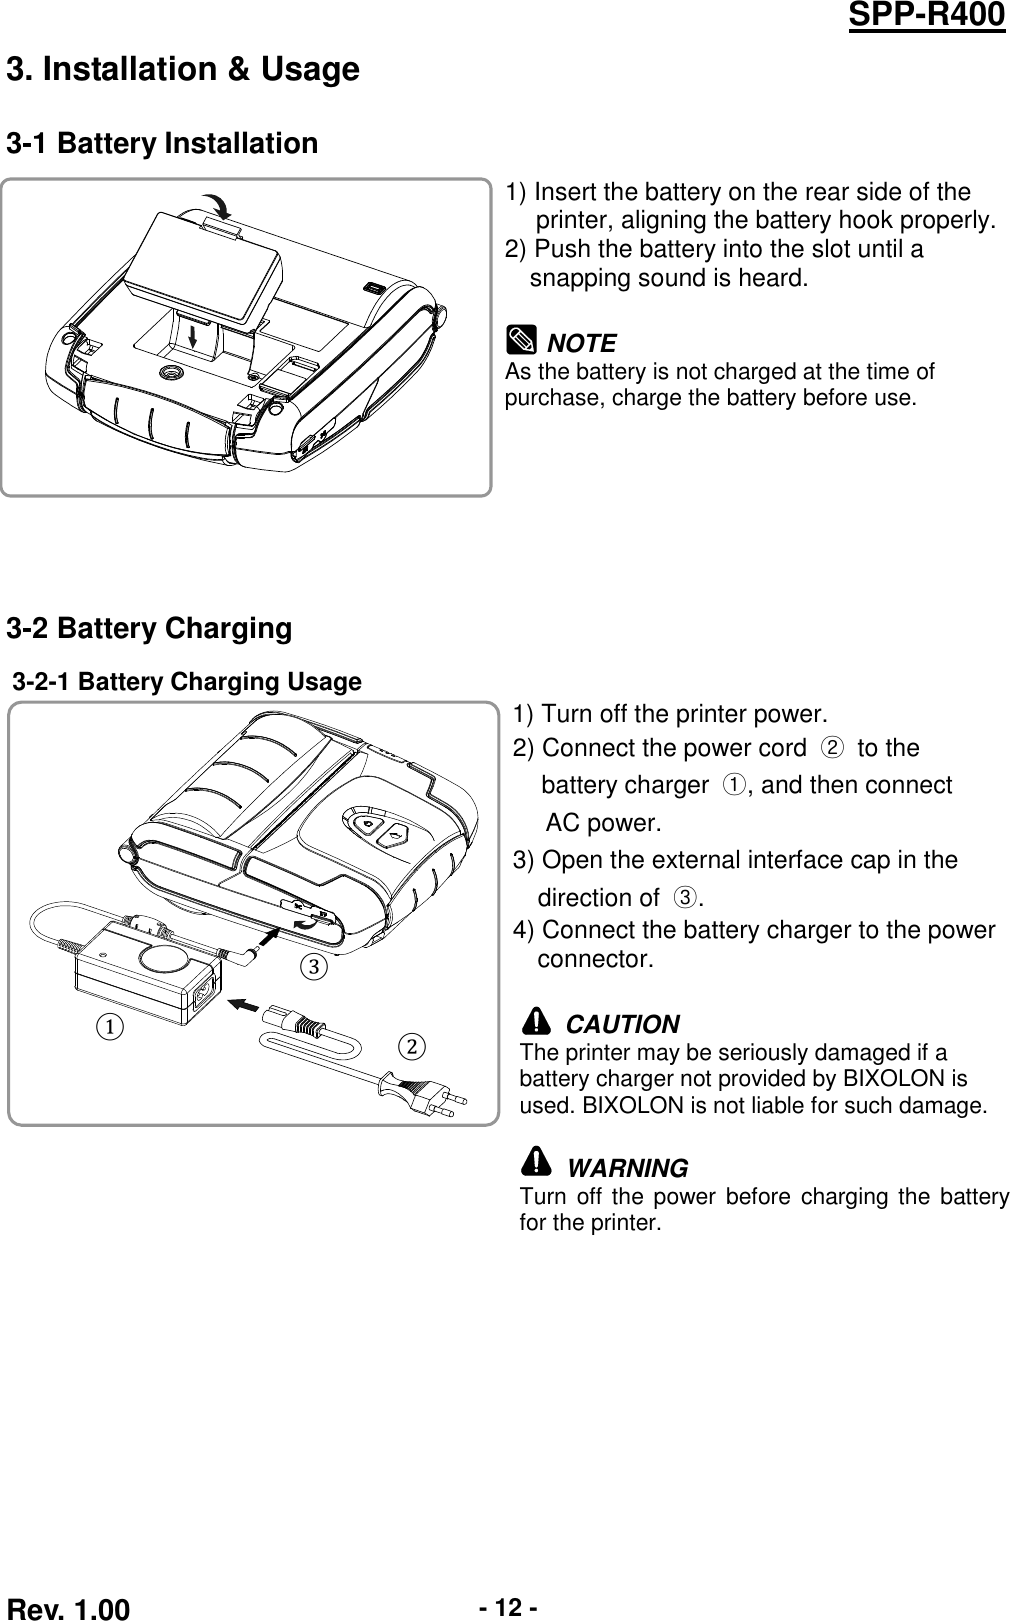  Rev. 1.00 - 12 - SPP-R400 3. Installation &amp; Usage 3-1 Battery Installation    1) Insert the battery on the rear side of the   printer, aligning the battery hook properly. 2) Push the battery into the slot until a   snapping sound is heard.   NOTE As the battery is not charged at the time of   purchase, charge the battery before use. 3-2 Battery Charging 3-2-1 Battery Charging Usage    1) Turn off the printer power. 2) Connect the power cord  ②  to the   battery charger  ①, and then connect   AC power. 3) Open the external interface cap in the   direction of  ③. 4) Connect the battery charger to the power connector.   CAUTION The printer may be seriously damaged if a battery charger not provided by BIXOLON is used. BIXOLON is not liable for such damage.   WARNING Turn off the power before charging the battery for the printer.   ① ② ③ 